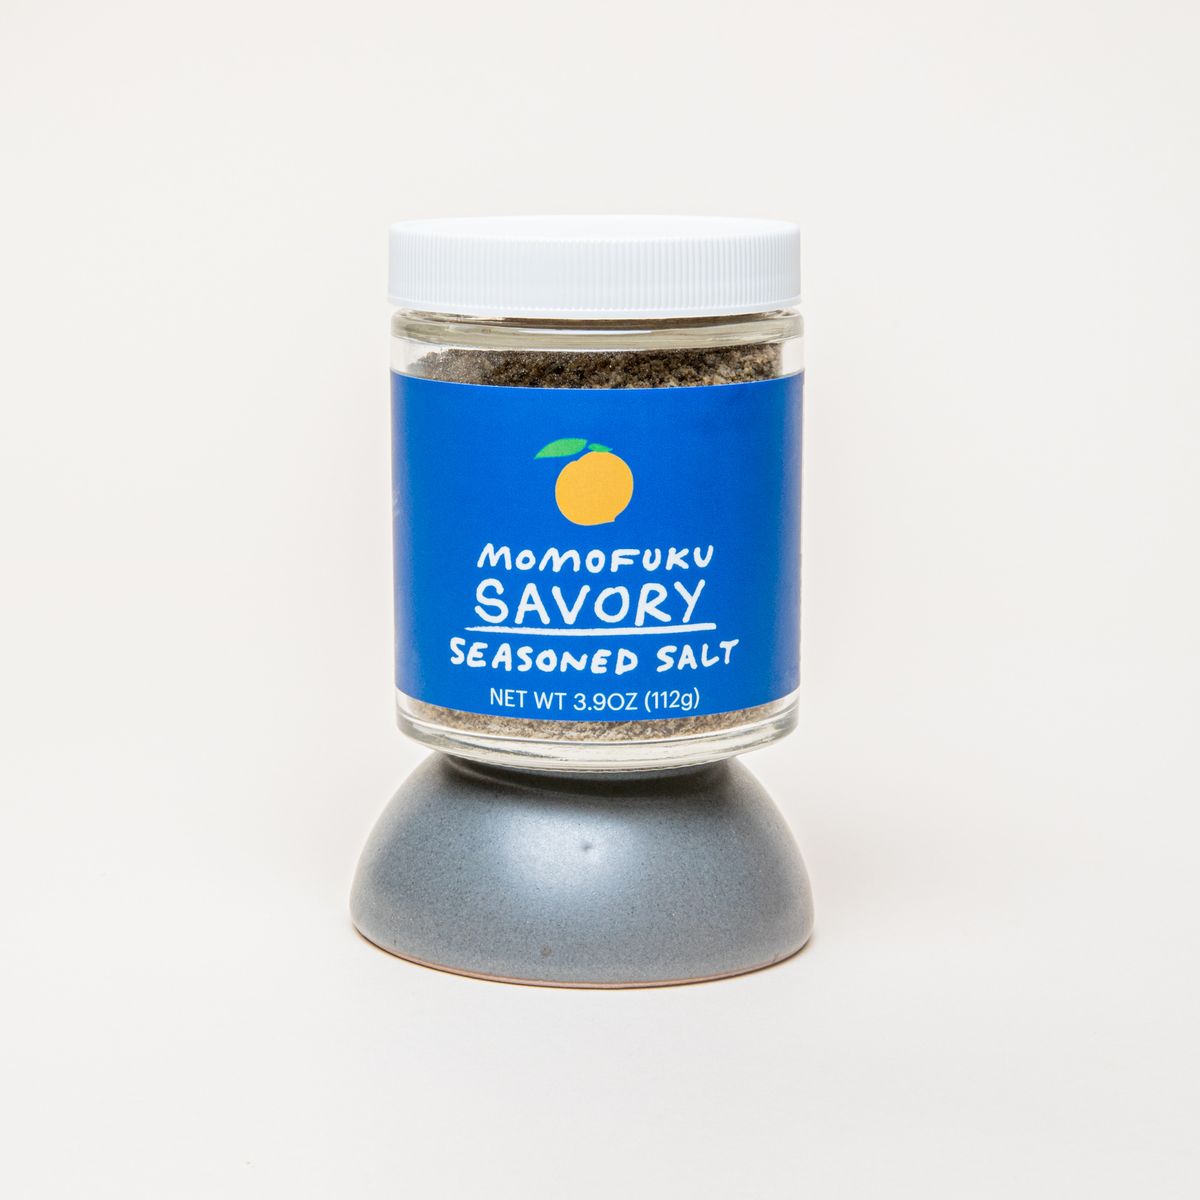 A jar with a white top and blue label that reads "Momofuku Savory Seasoned Salt", sitting on top of an upside down tiny grey bowl